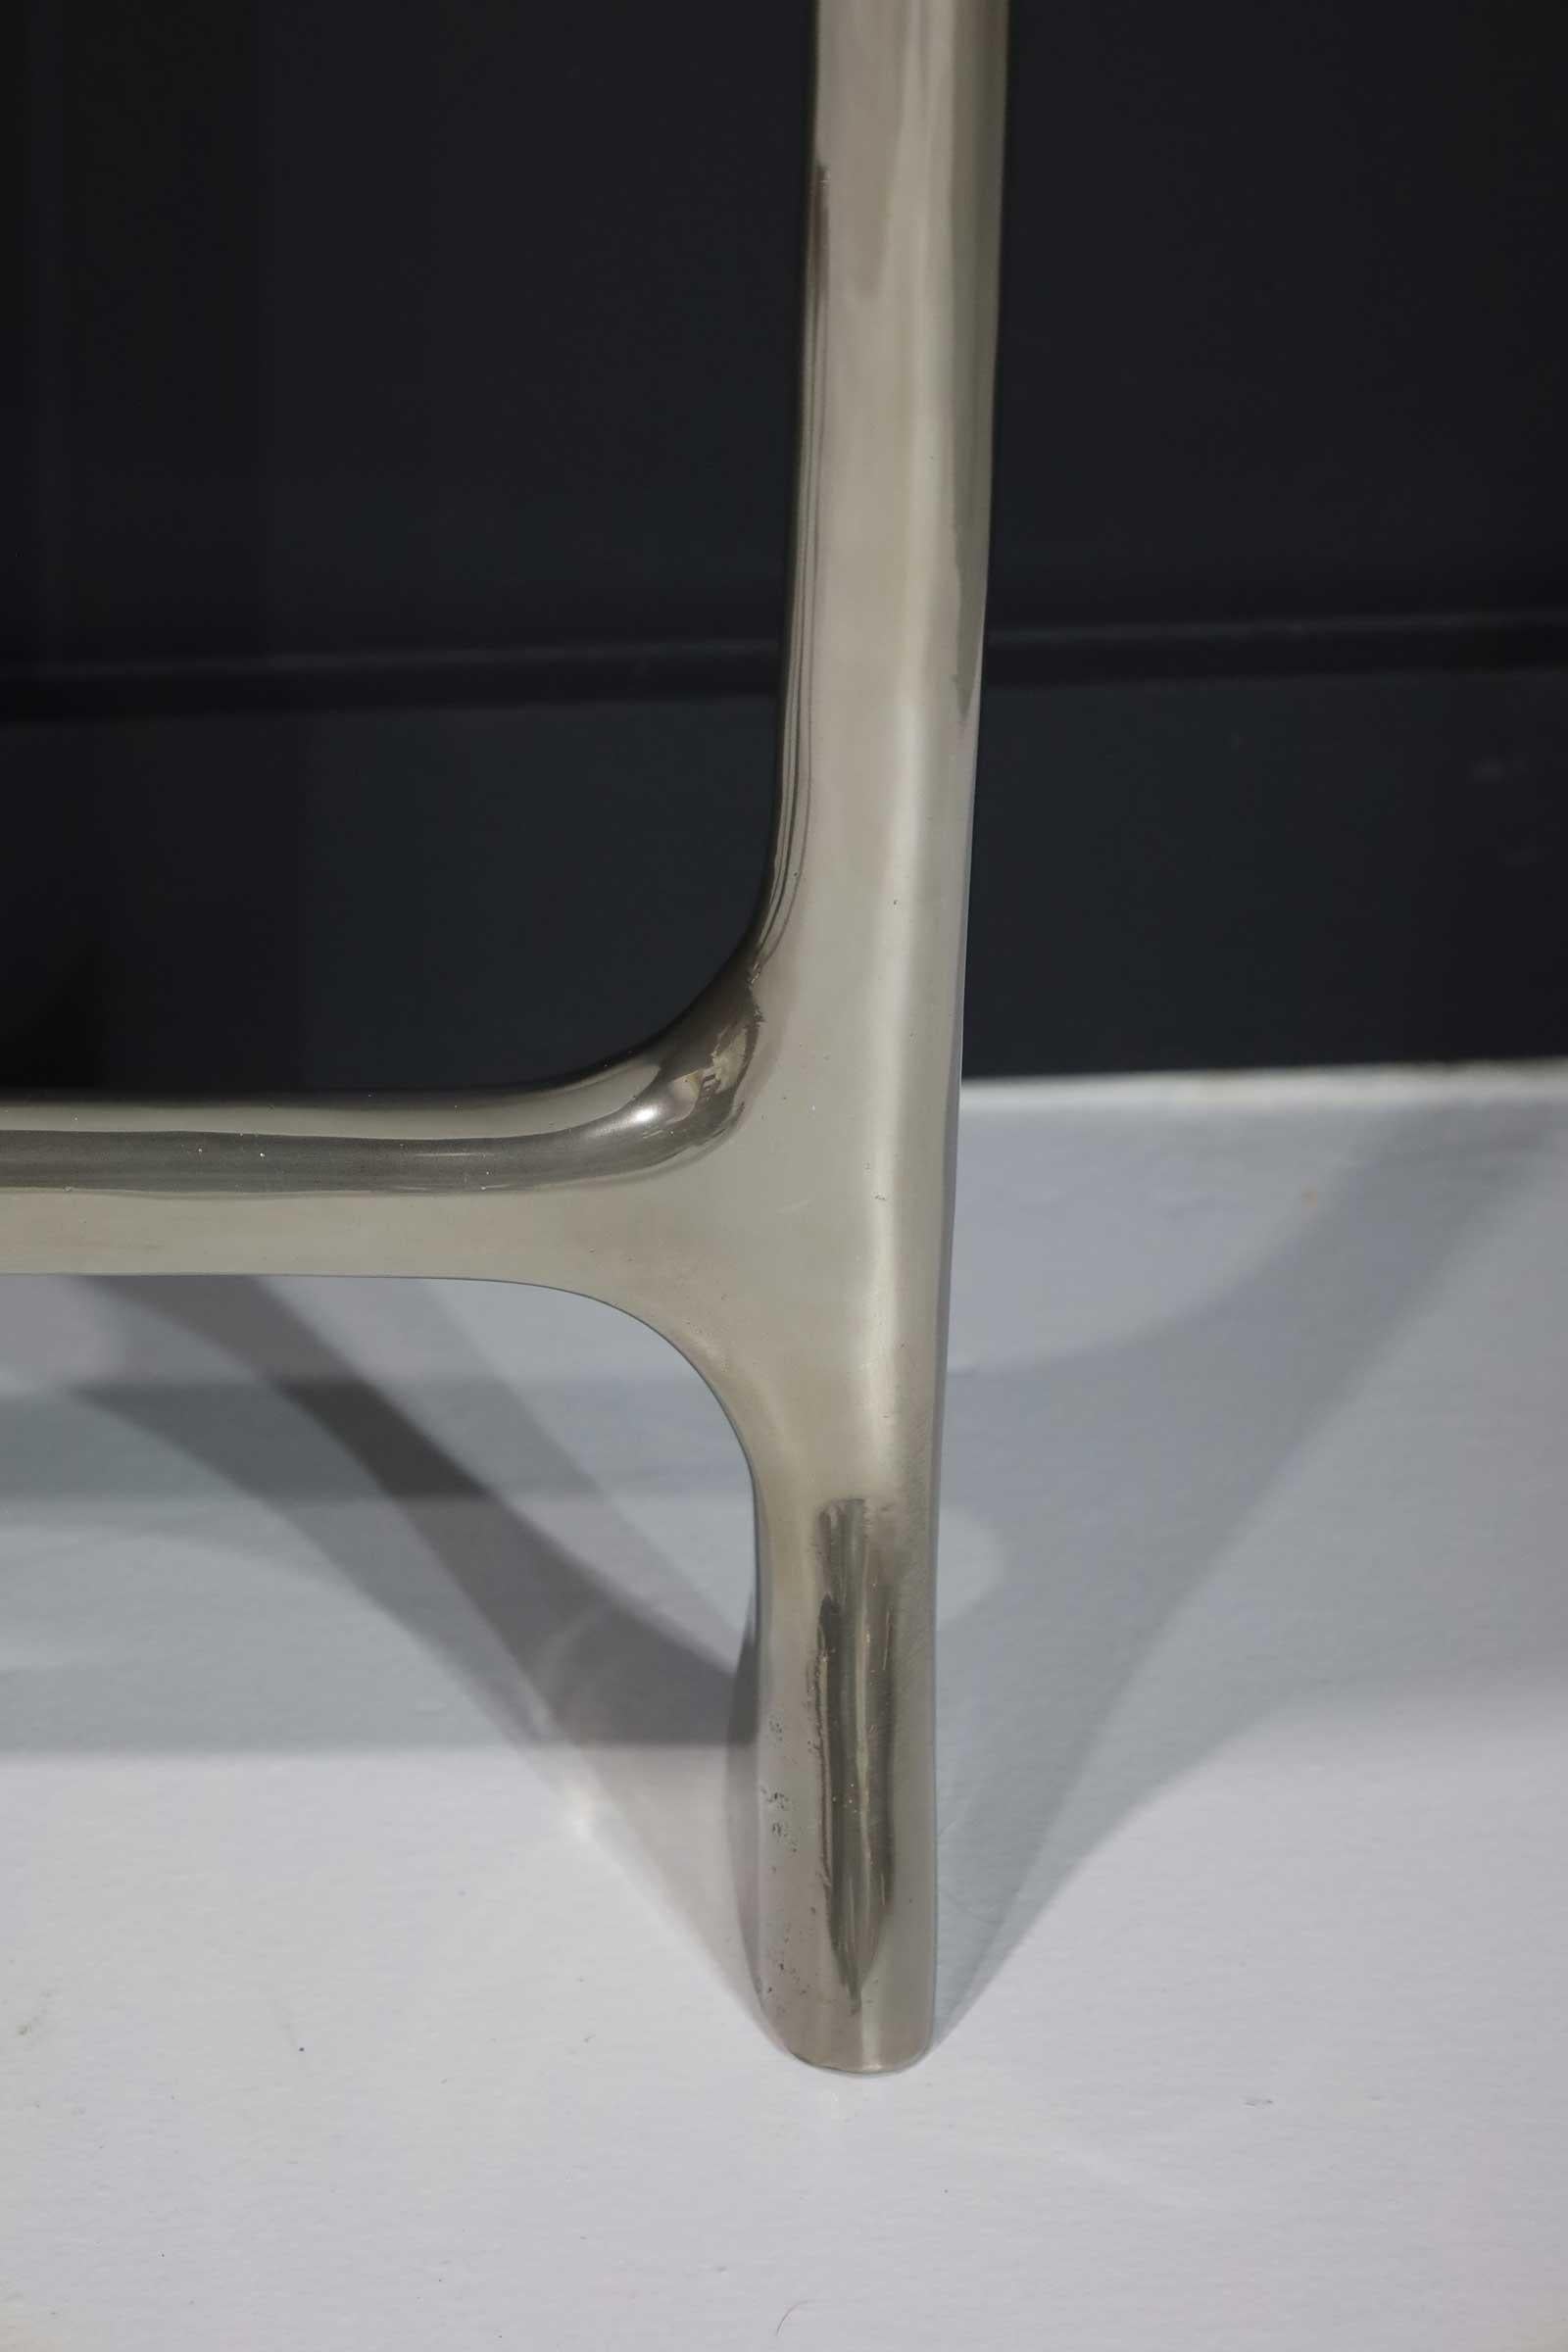 Scala Luxury Uovo Side Table in Polished Nickel and Polished Goatskin In Excellent Condition For Sale In Dallas, TX